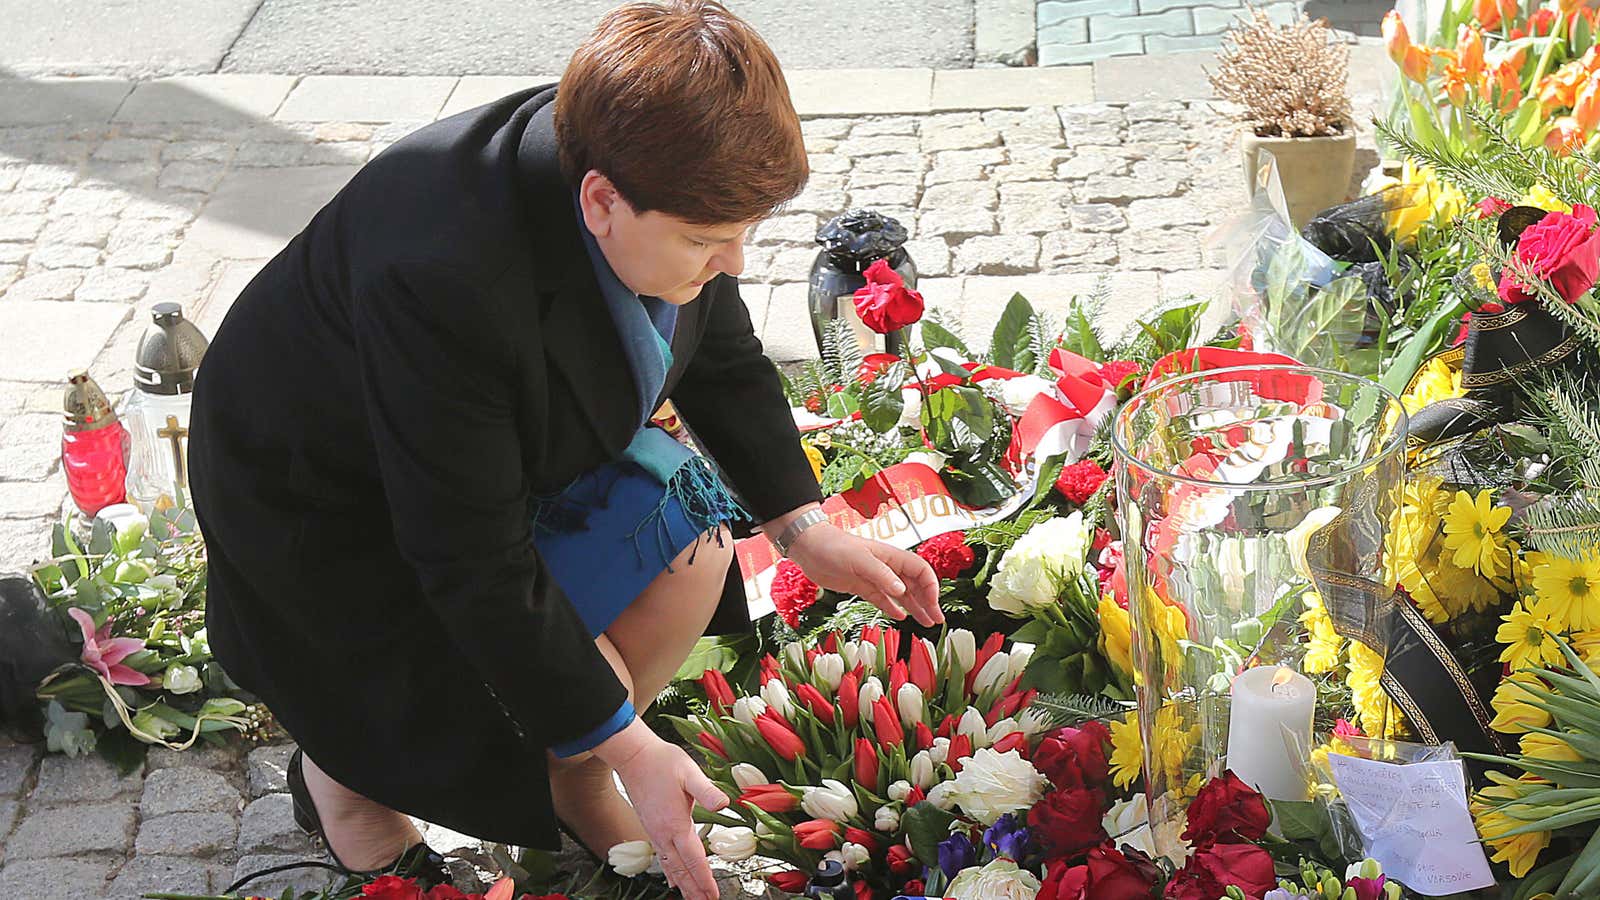 Poland’s prime minister Beata Szydlo after the Brussels attacks.